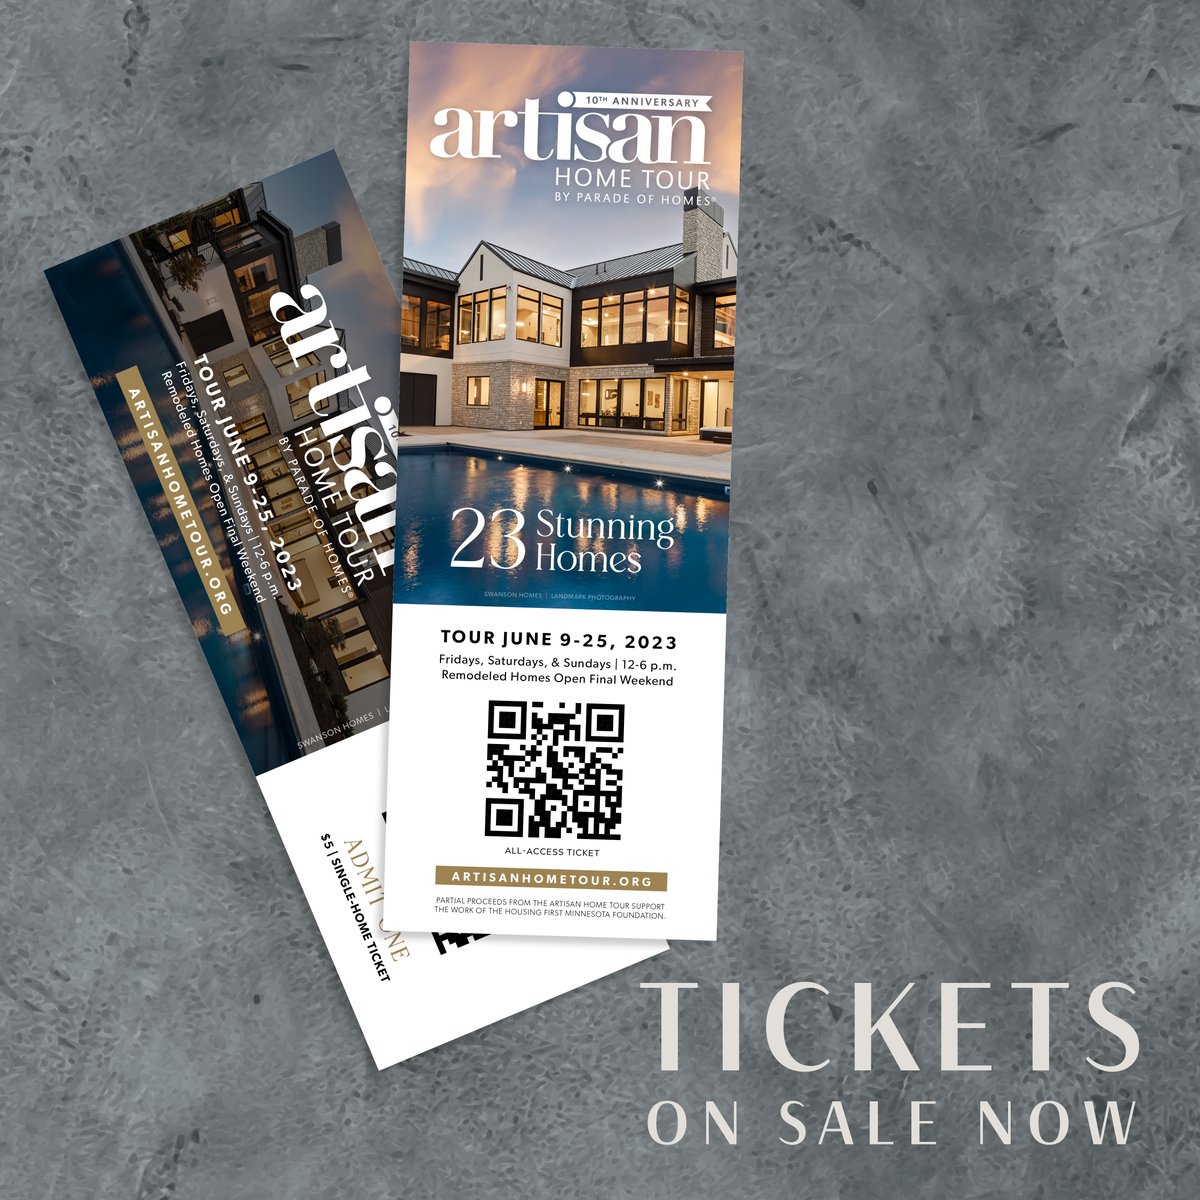 Tickets for our annual Artisan Home Tour are on sale online NOW! Buy yours online at artisanhometour.org. #OnlyArtisan